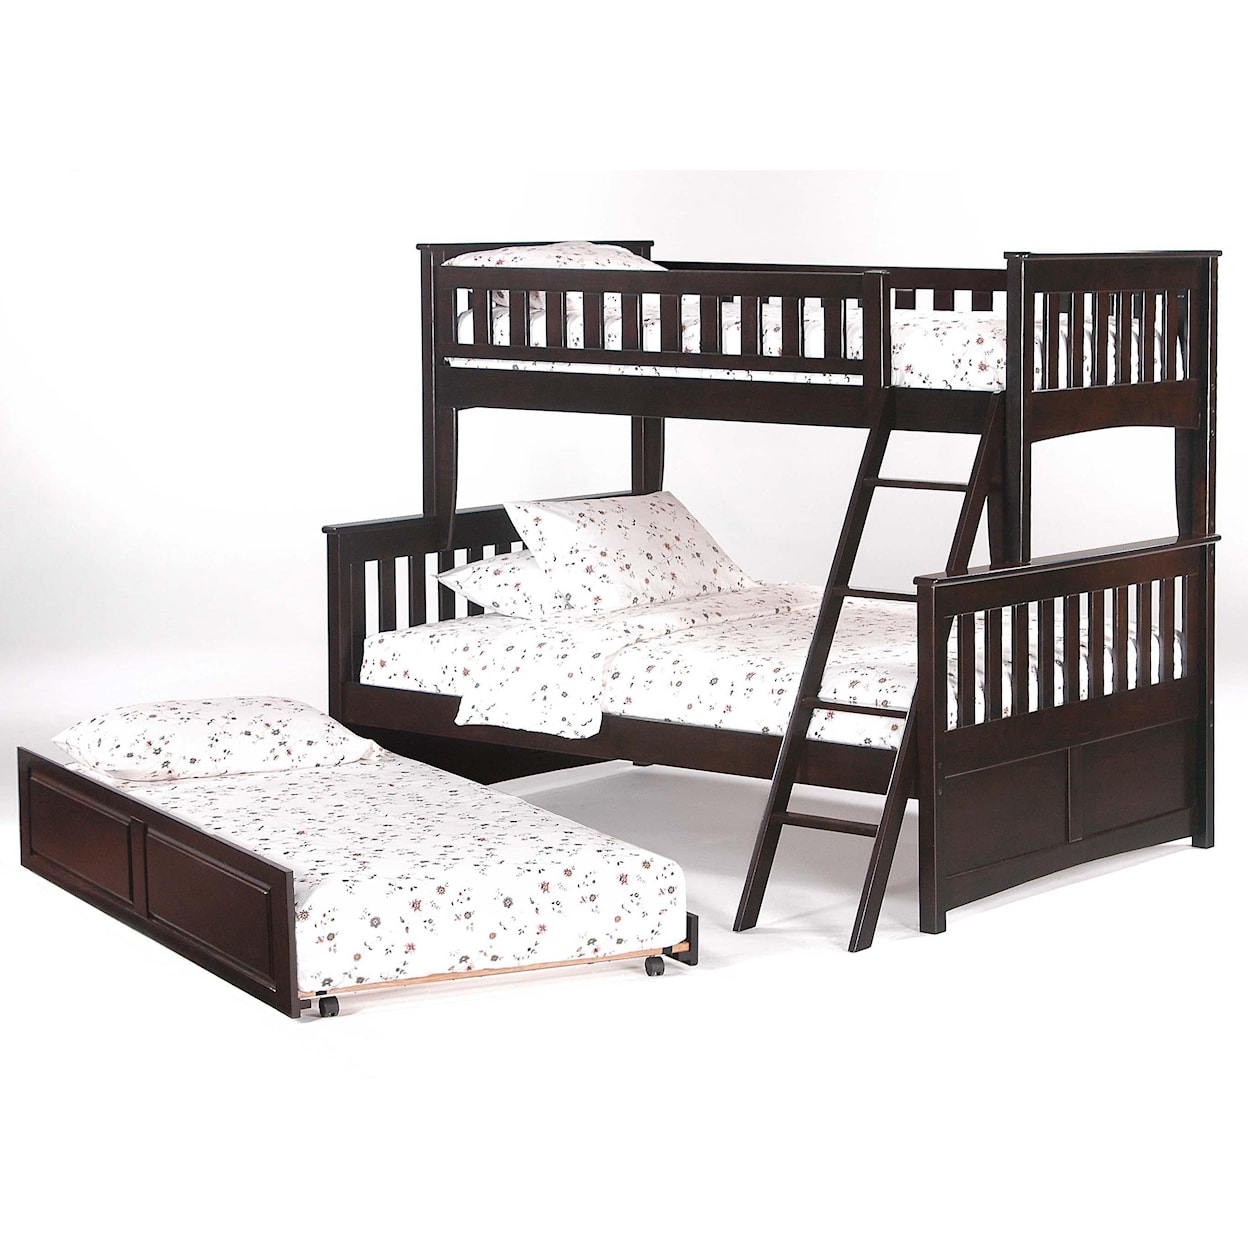 Night & Day Furniture Spice Twin/Full Bunk Bed with Trundle